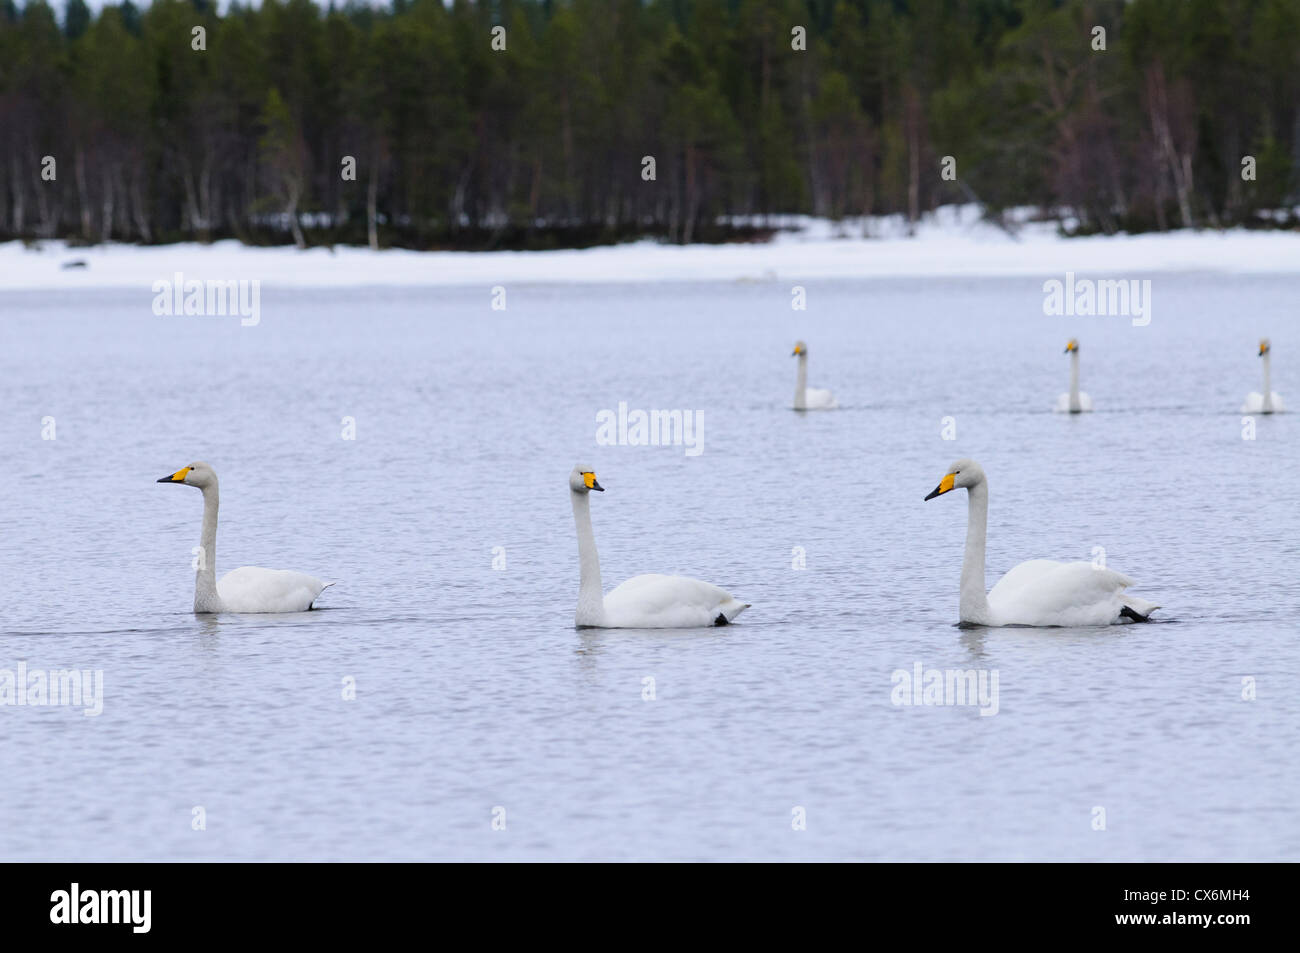 Group of whooper swans swimming in a lake with snow on the shore Stock Photo